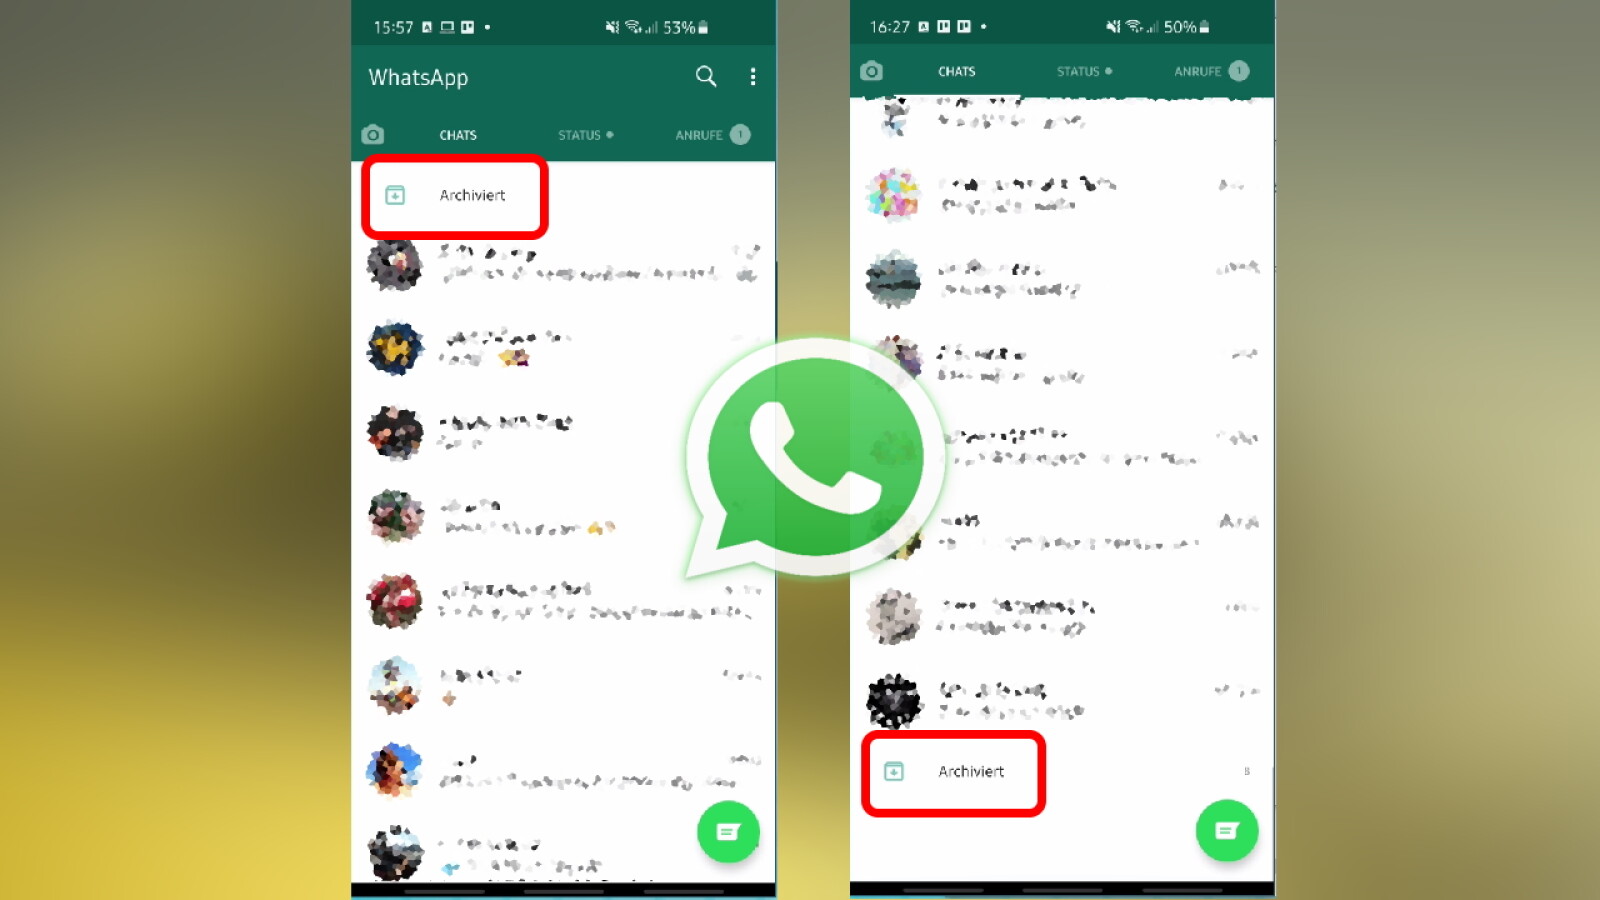 A archive chat when you whatsapp happens what Good News!